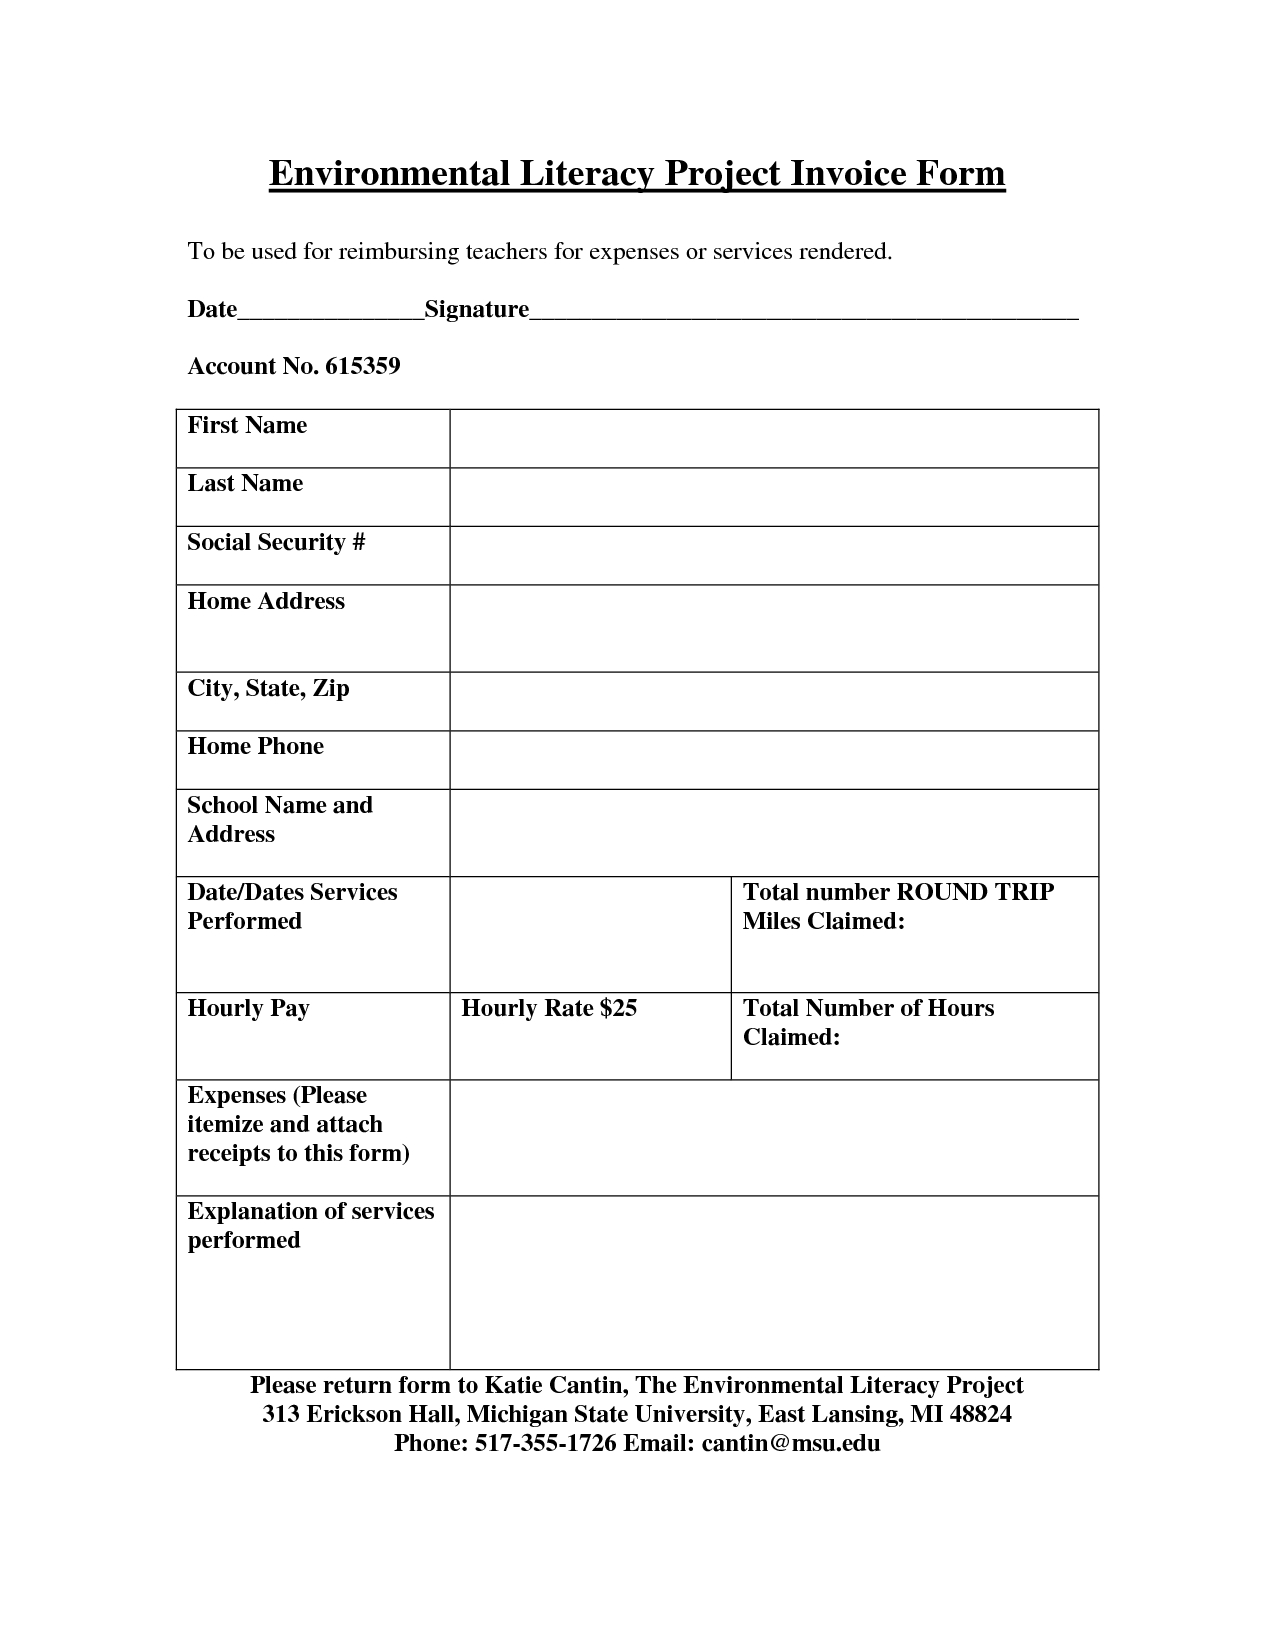 blank invoice template blank invoice free blank invoice form